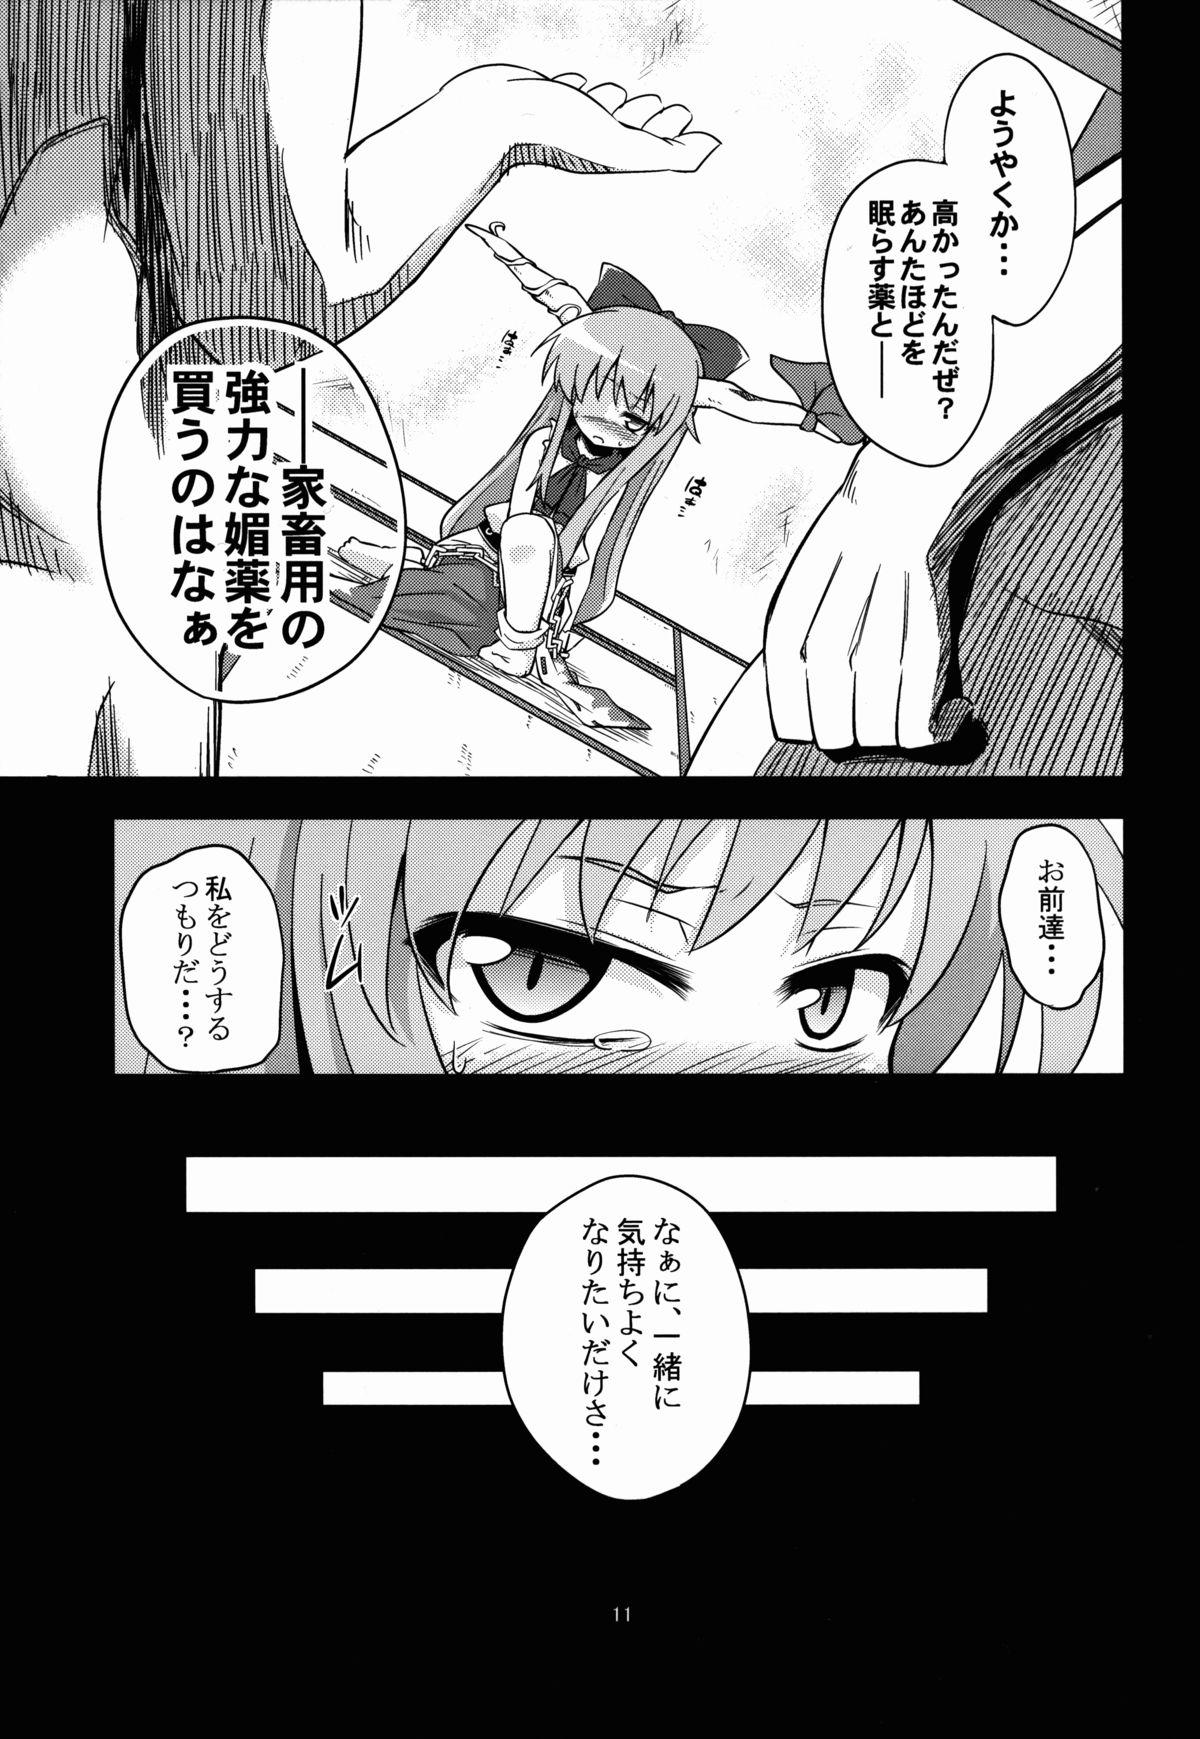 Spain 鬼犯嘘犯喜 - Touhou project Gay Shorthair - Page 11